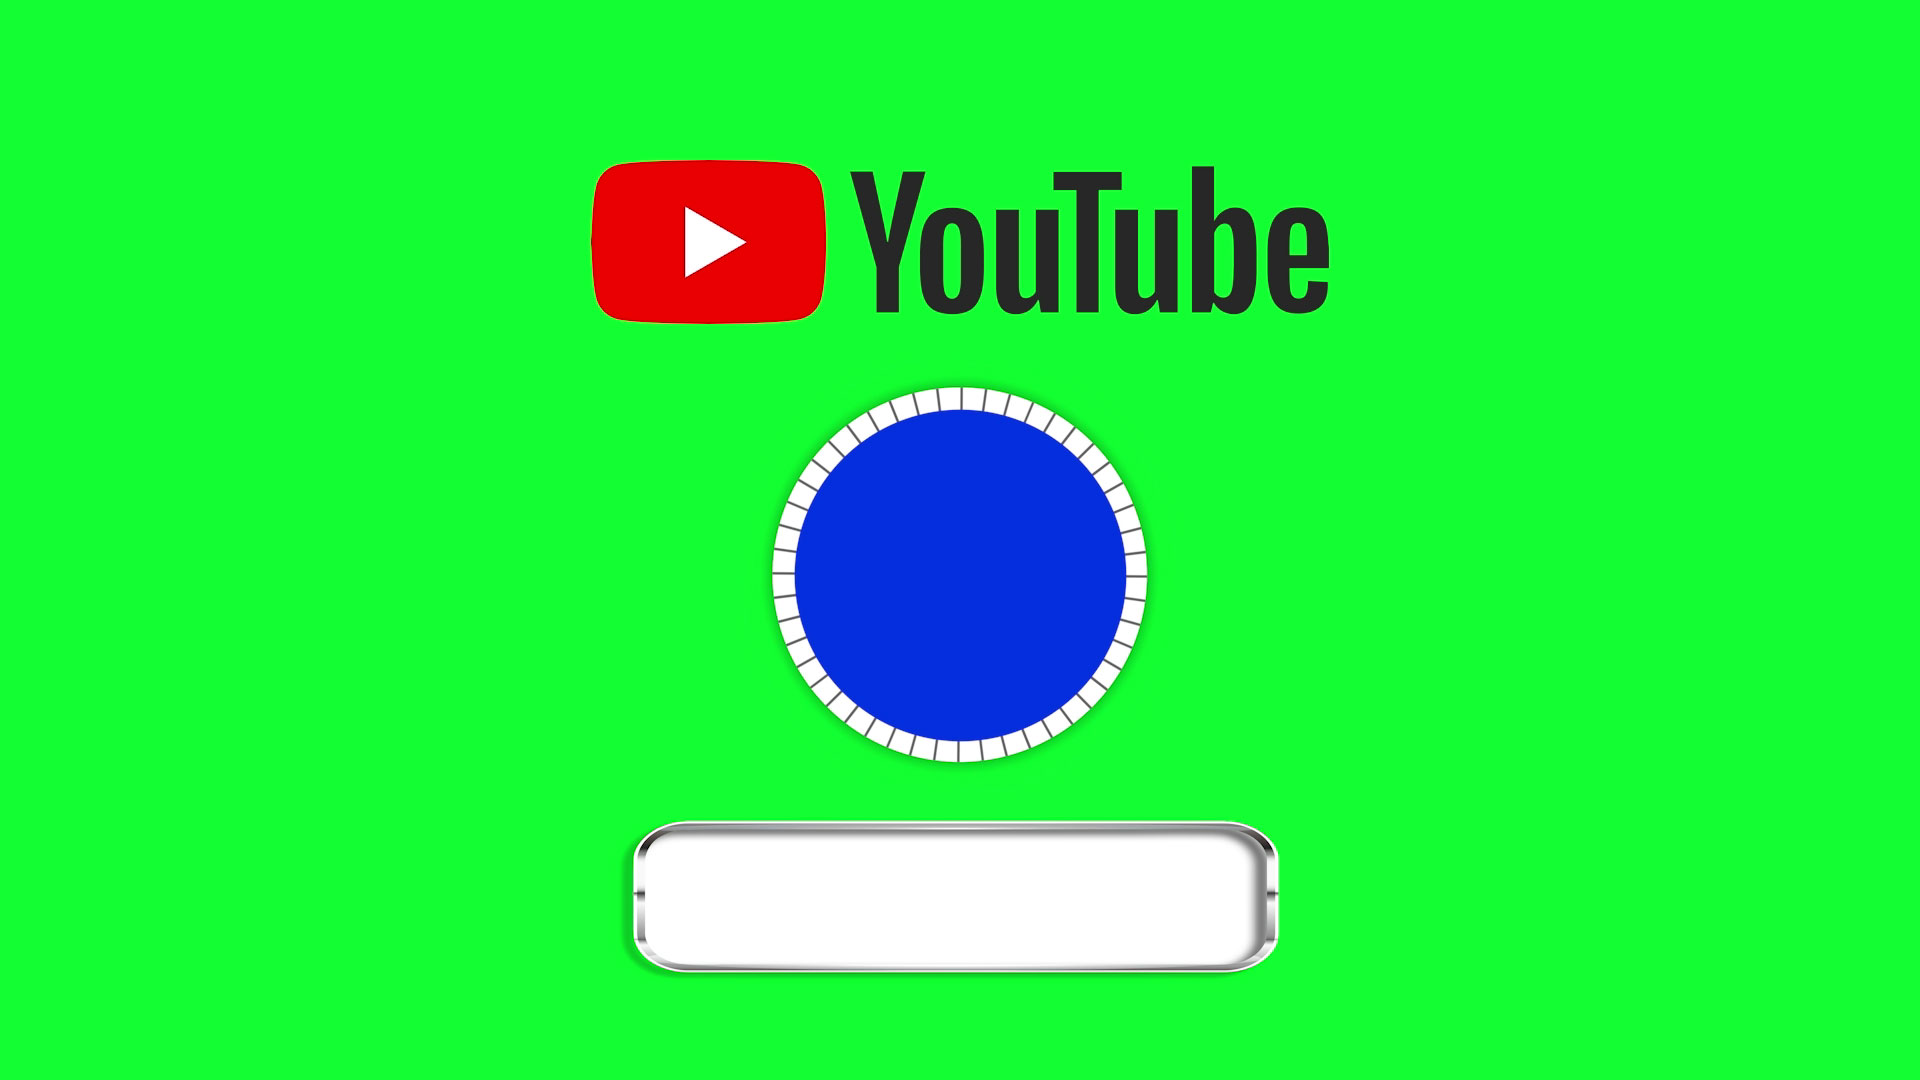 Youtube Channel Intro Green Screen Background Video Effect No Copyright